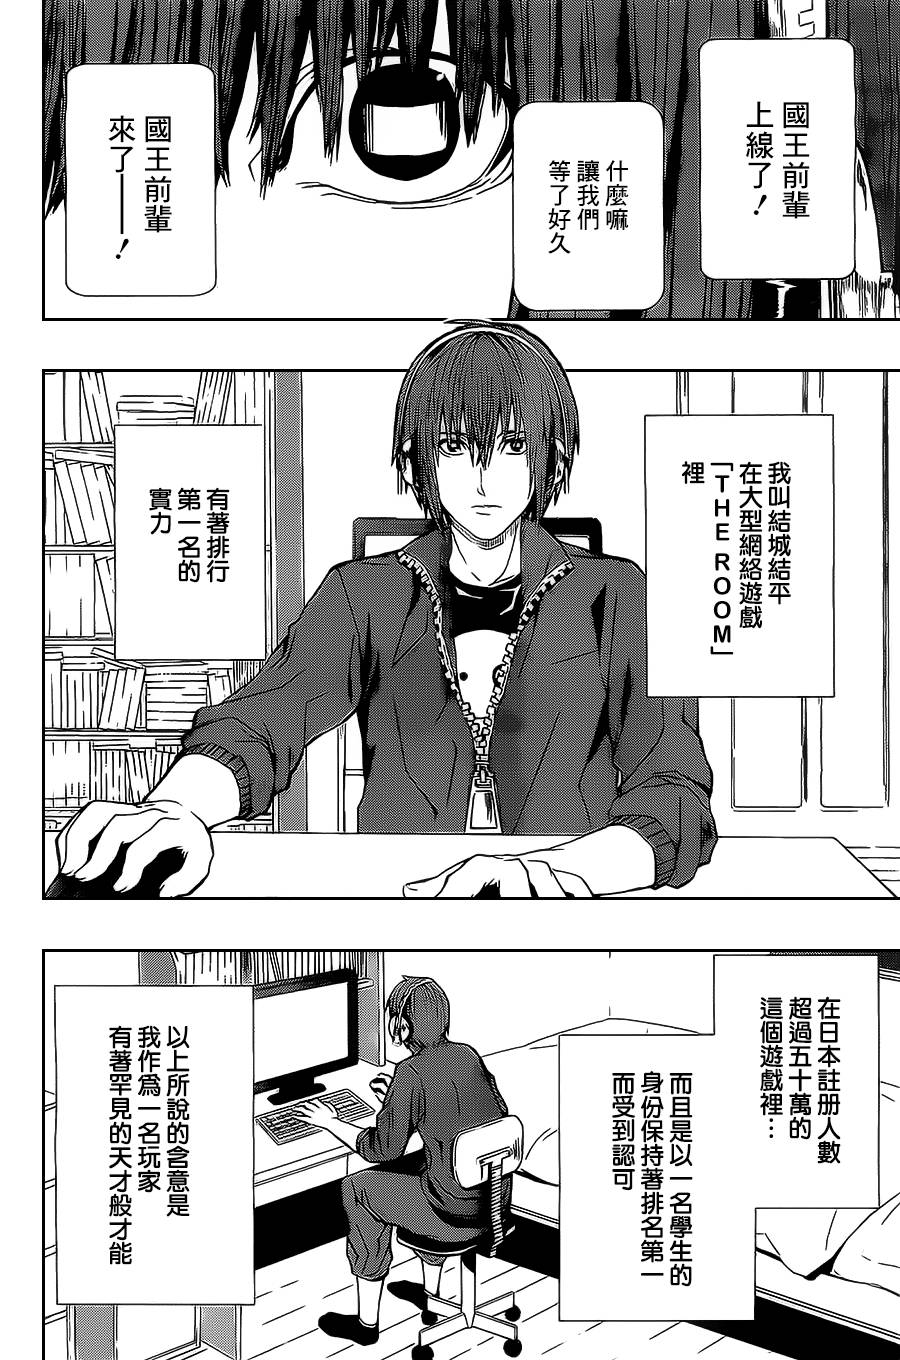 In The Room第01话 In The Room漫画 动漫之家漫画网